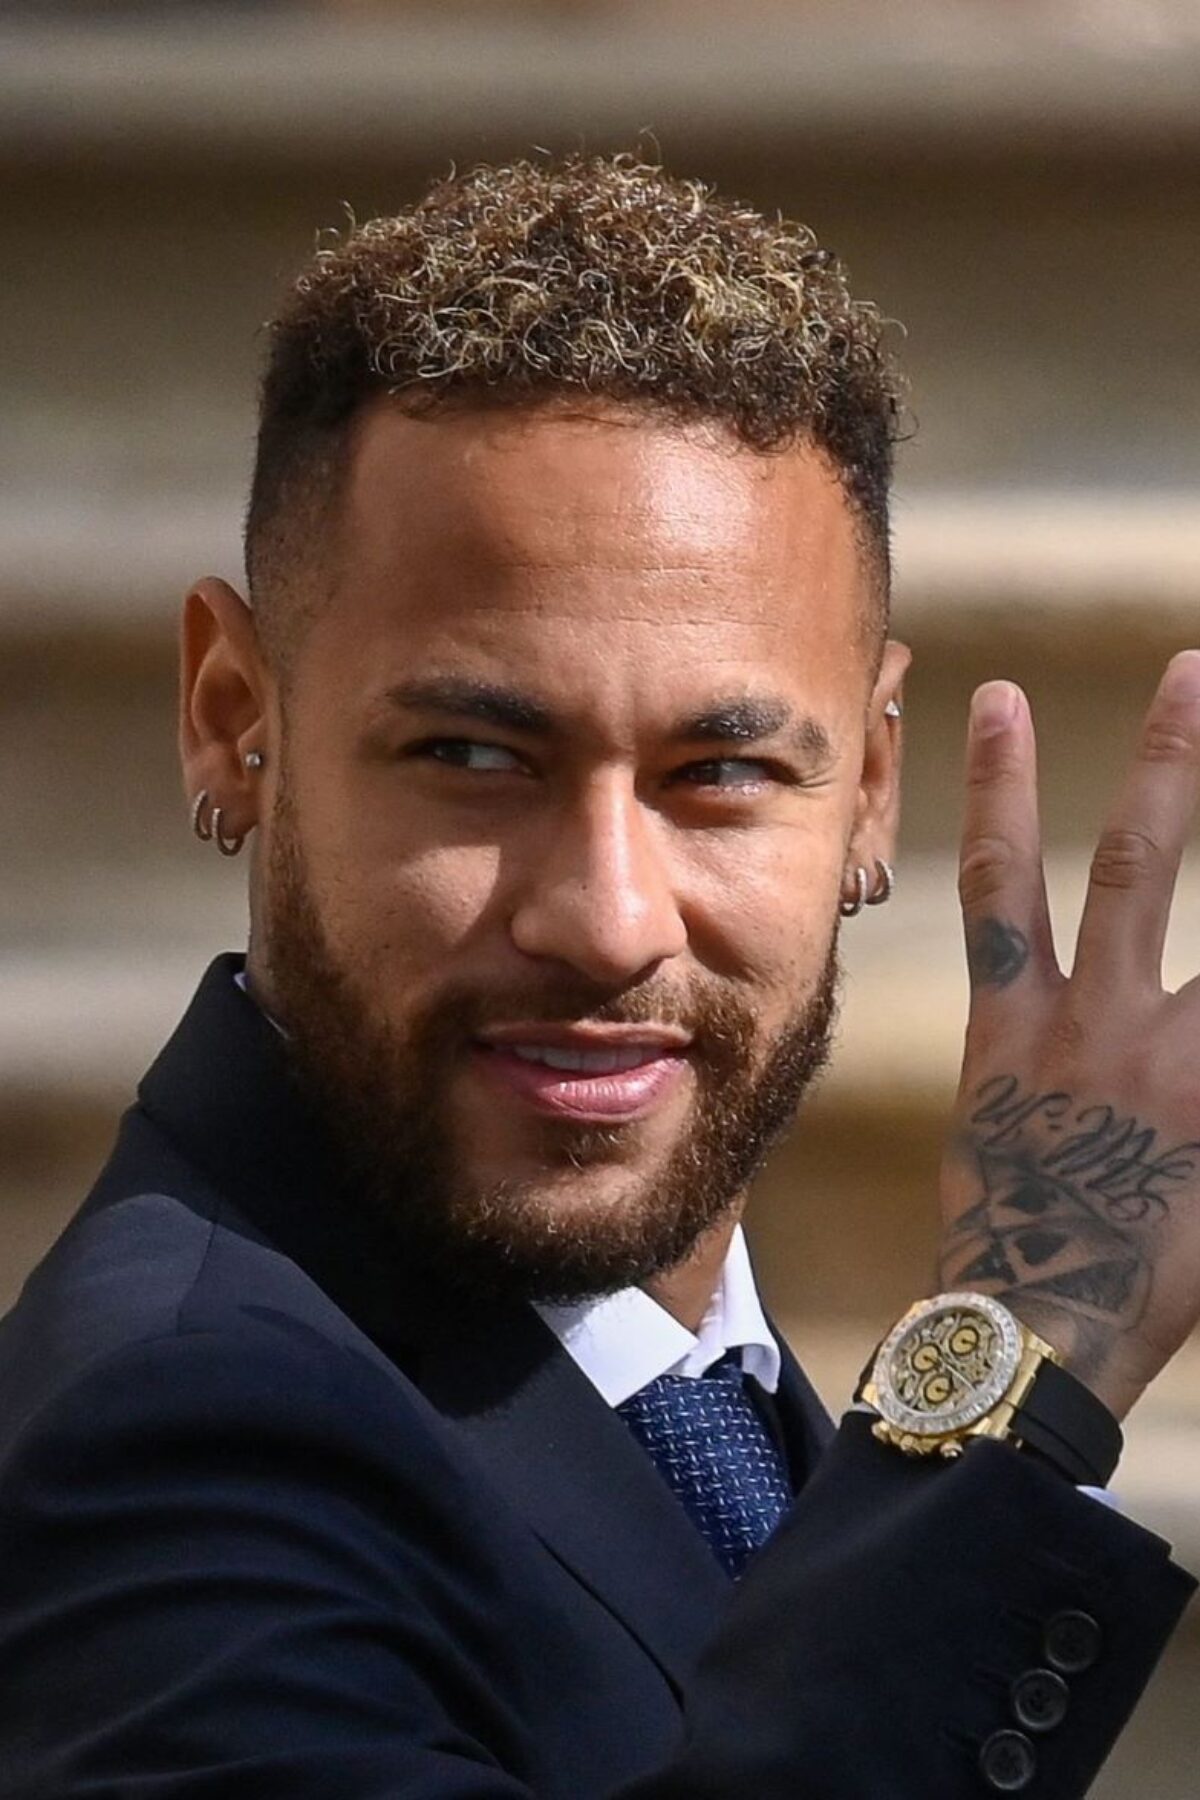 TOPSHOT - Paris Saint-Germain's Brazilian forward Neymar gestures as he leaves after attending a hearing at the courthouse in Barcelona on October 18, 2022, on the second day of his trial. - Brazil superstar Neymar said his manager father always handled his contracts as he took the stand at his trial over alleged irregularities in his transfer to Barcelona in 2013. He also said he did not remember if he took part in the negotiations which led to an agreement sealed in 2011 with Barcelona over his transfer two years later to the Catalan side from Brazilian club Santos. (Photo by Josep LAGO / AFP) (Photo by JOSEP LAGO/AFP via Getty Images)